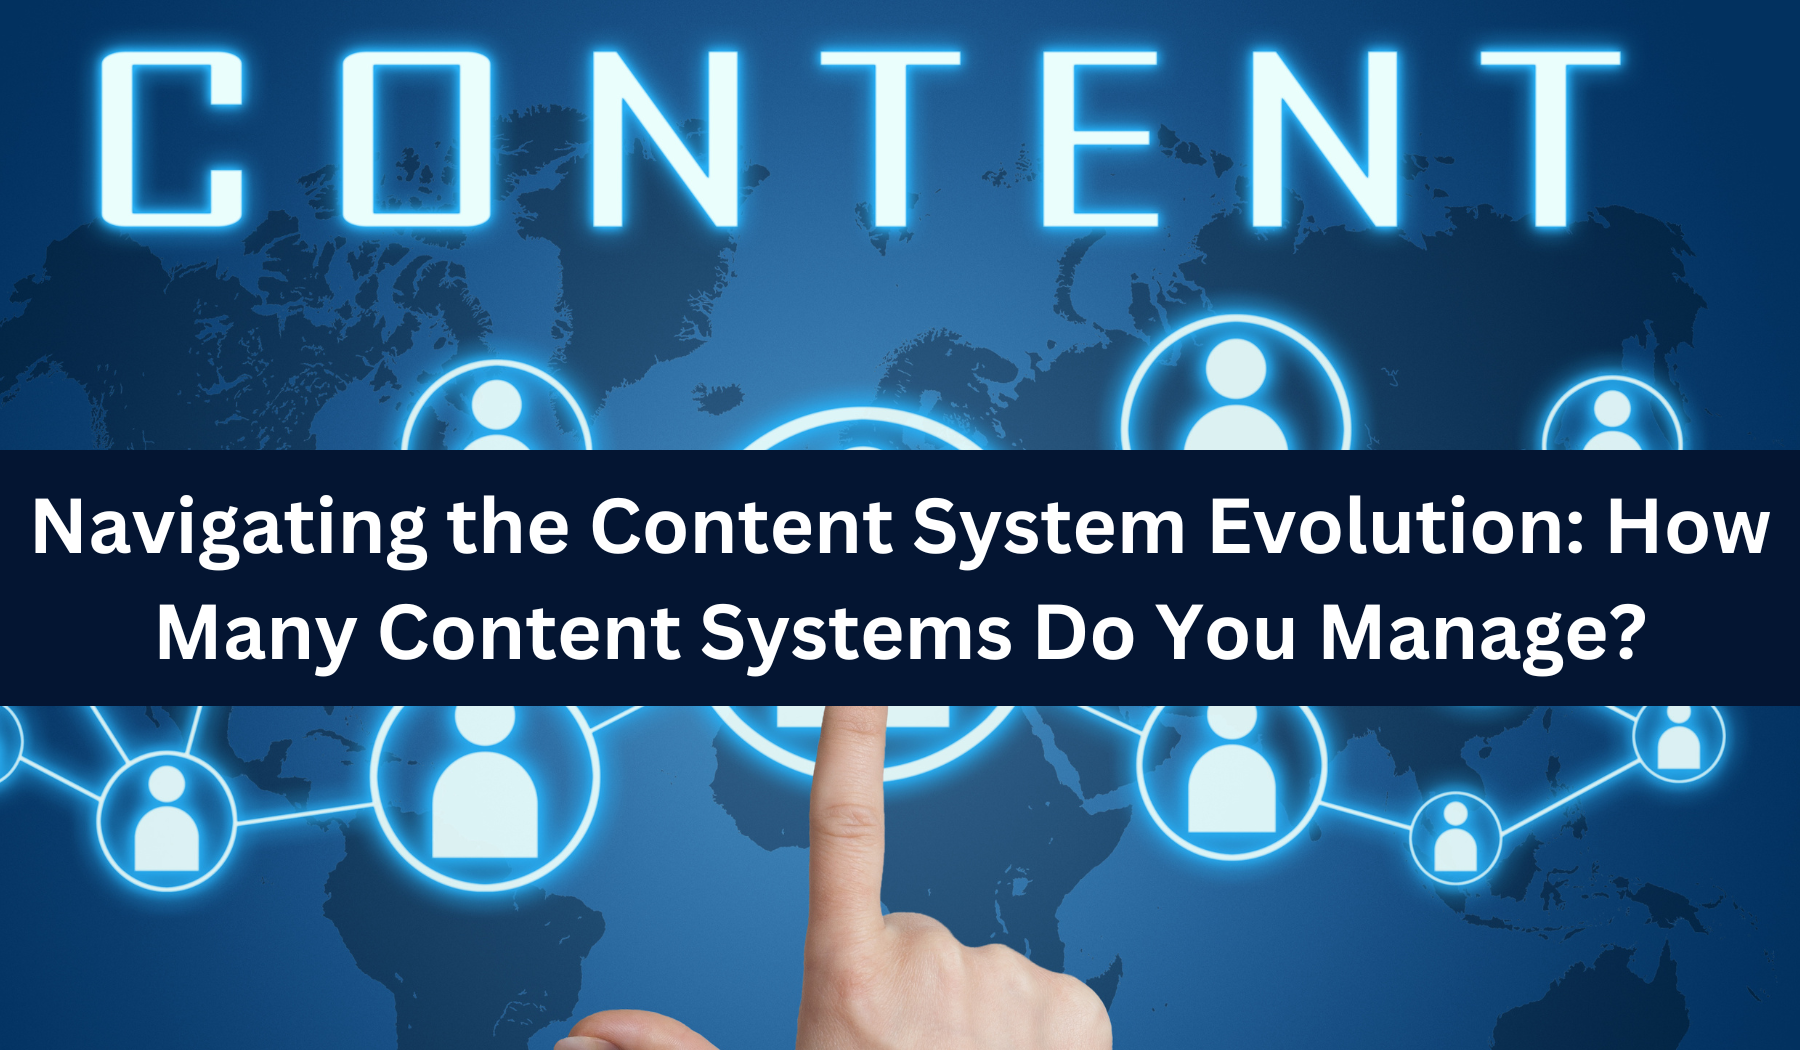 Navigating the Content System Evolution: How Many Content Systems Do You Manage?